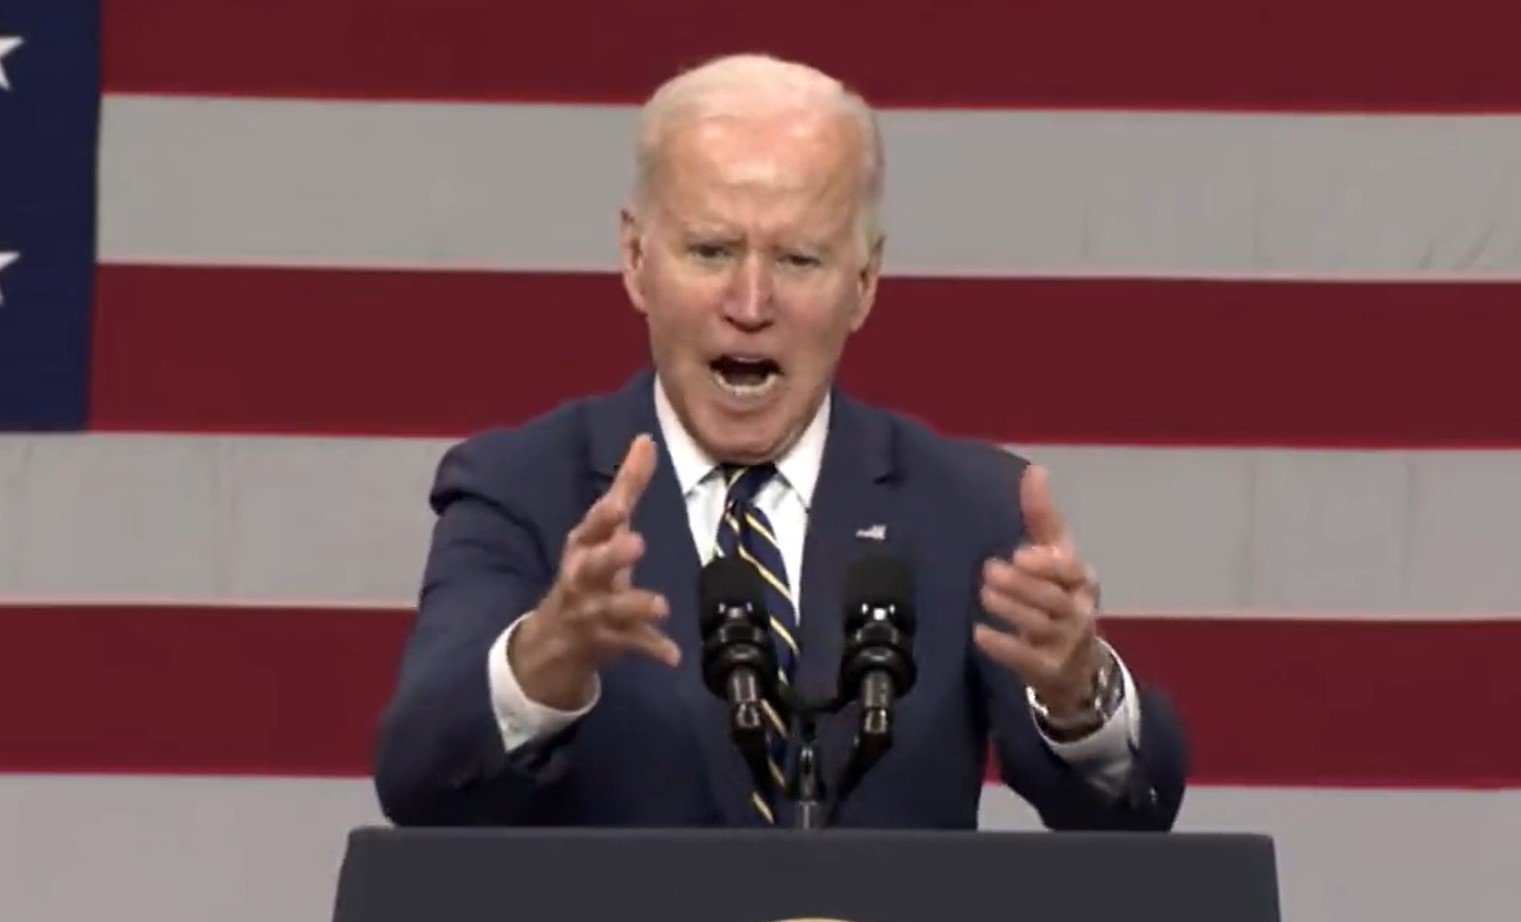  “It Strips You of Your Dignity, Dammit!” – Joe Biden Screams About Families Not Affording Insulin After He Raised the Prices (Video)